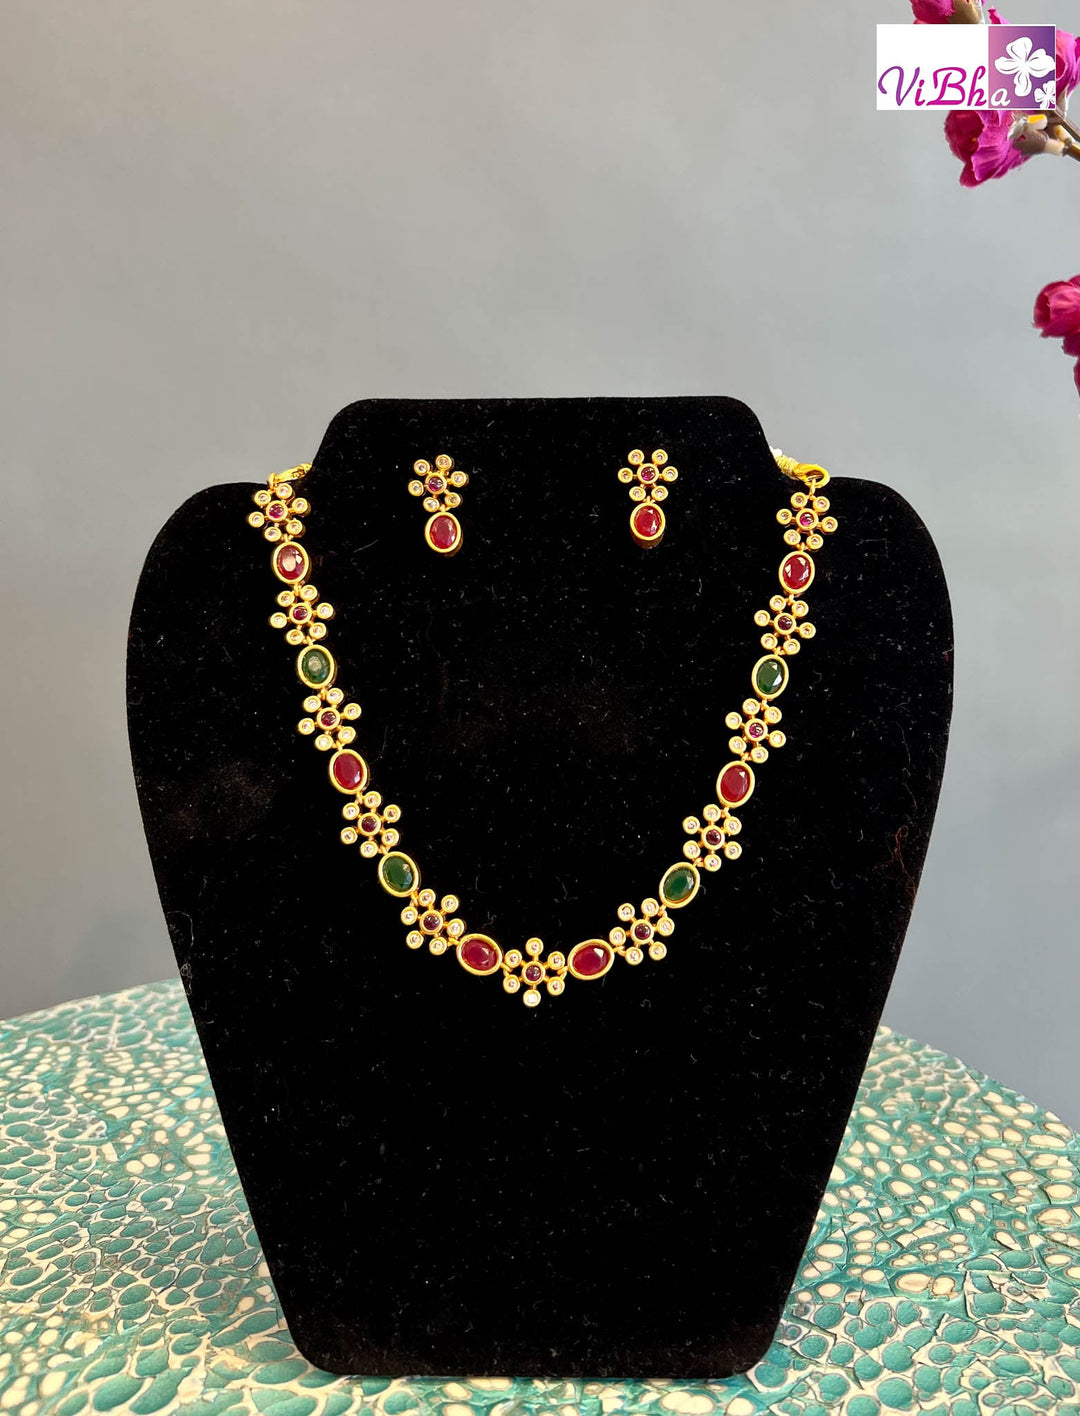 Accessories & Jewelry - Ruby And Jade Floral Motif